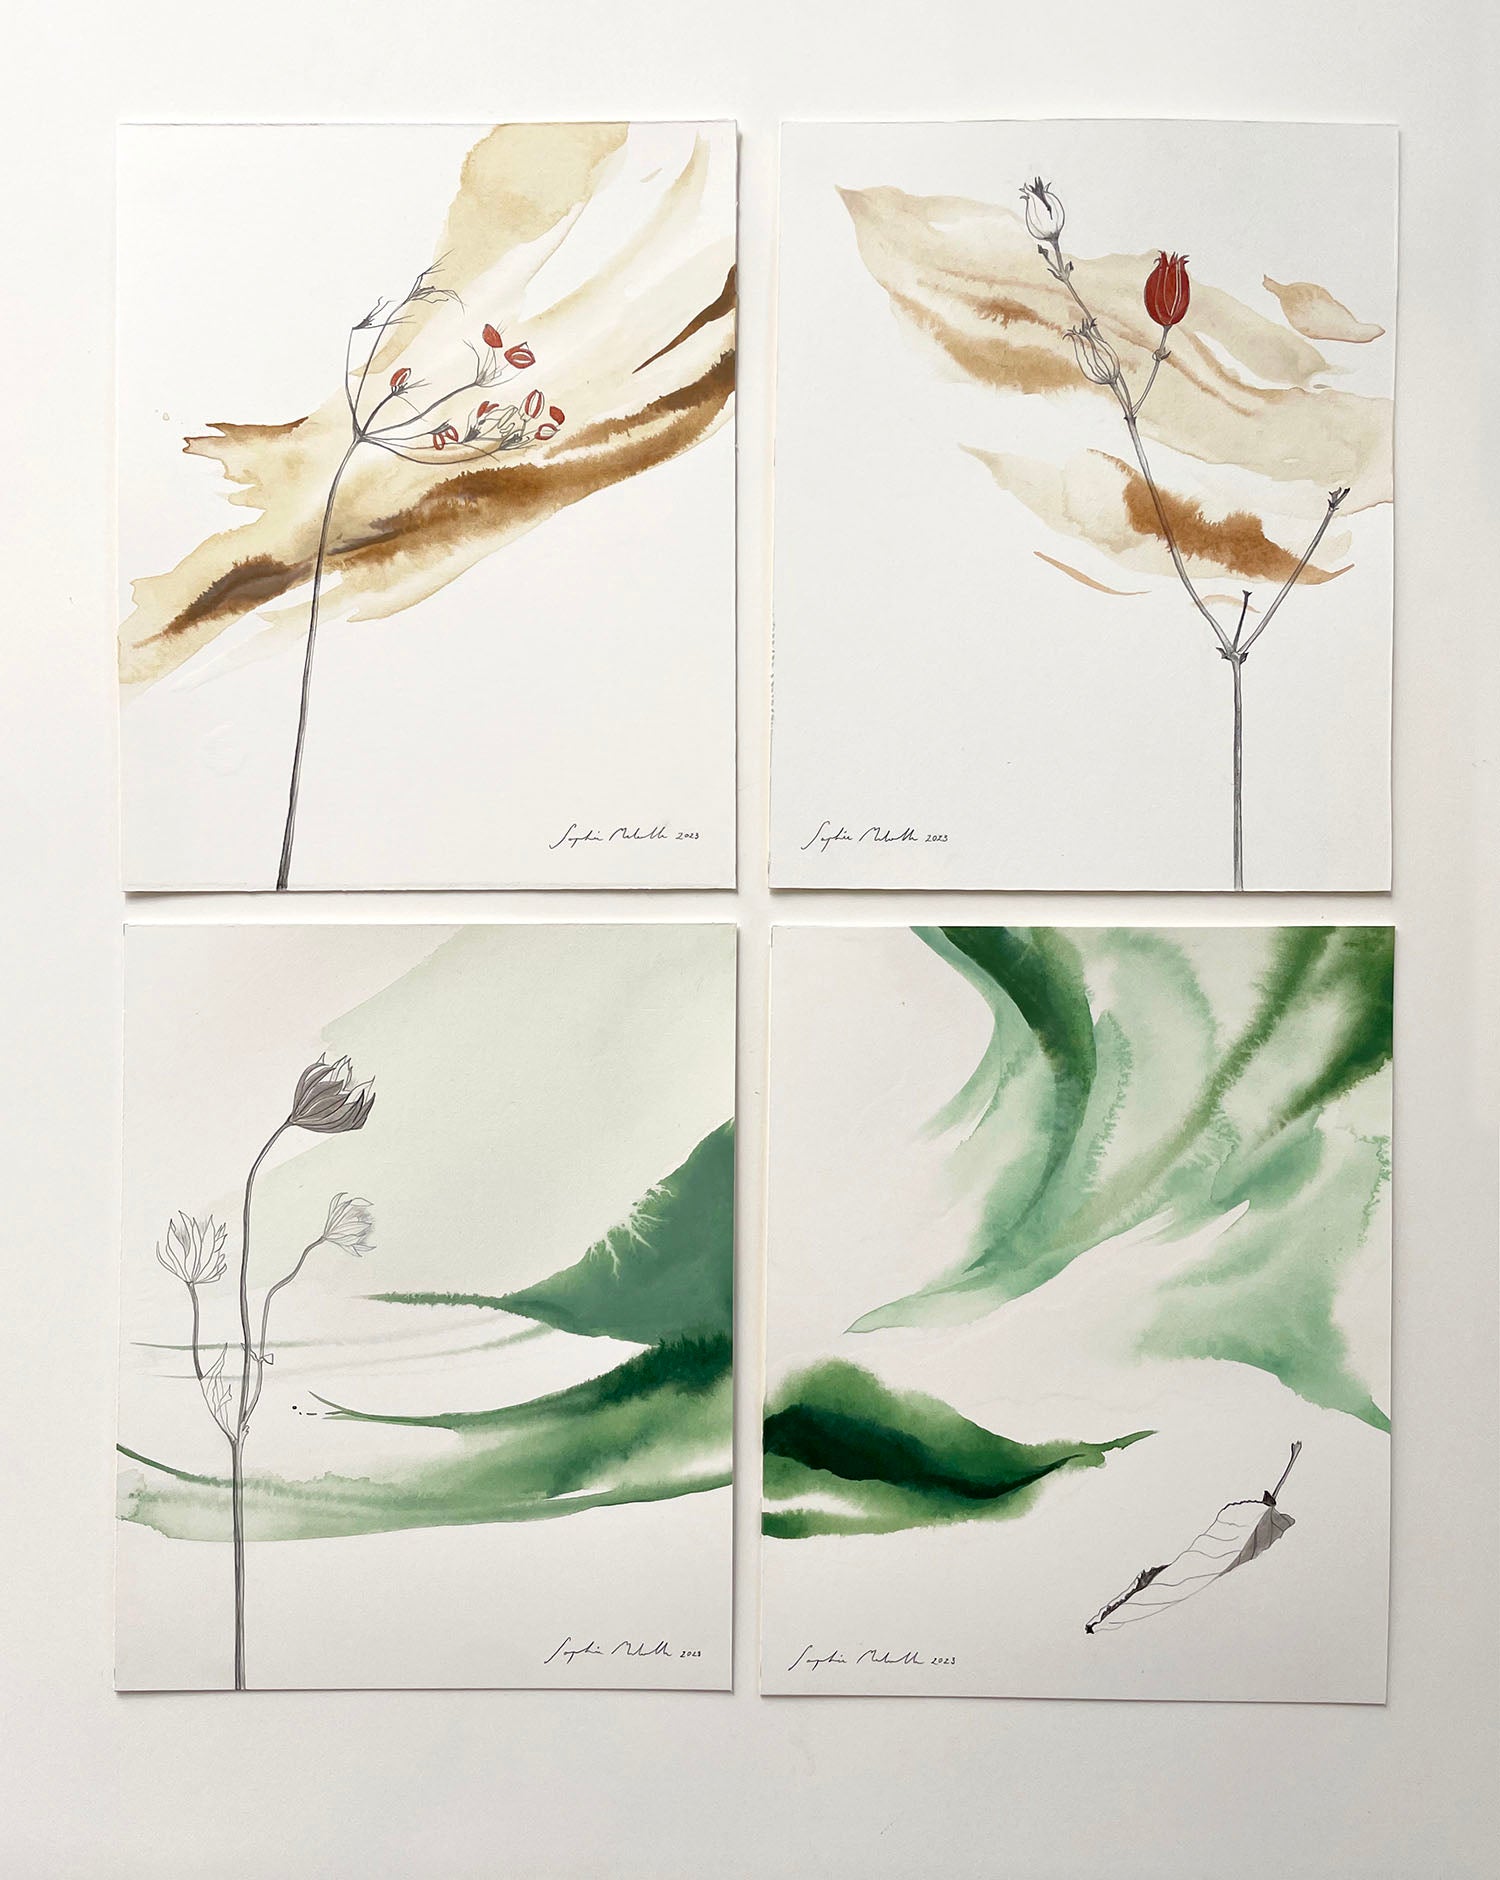 The Flawed collection - a series of small watercolour drawings created from a heartfelt place